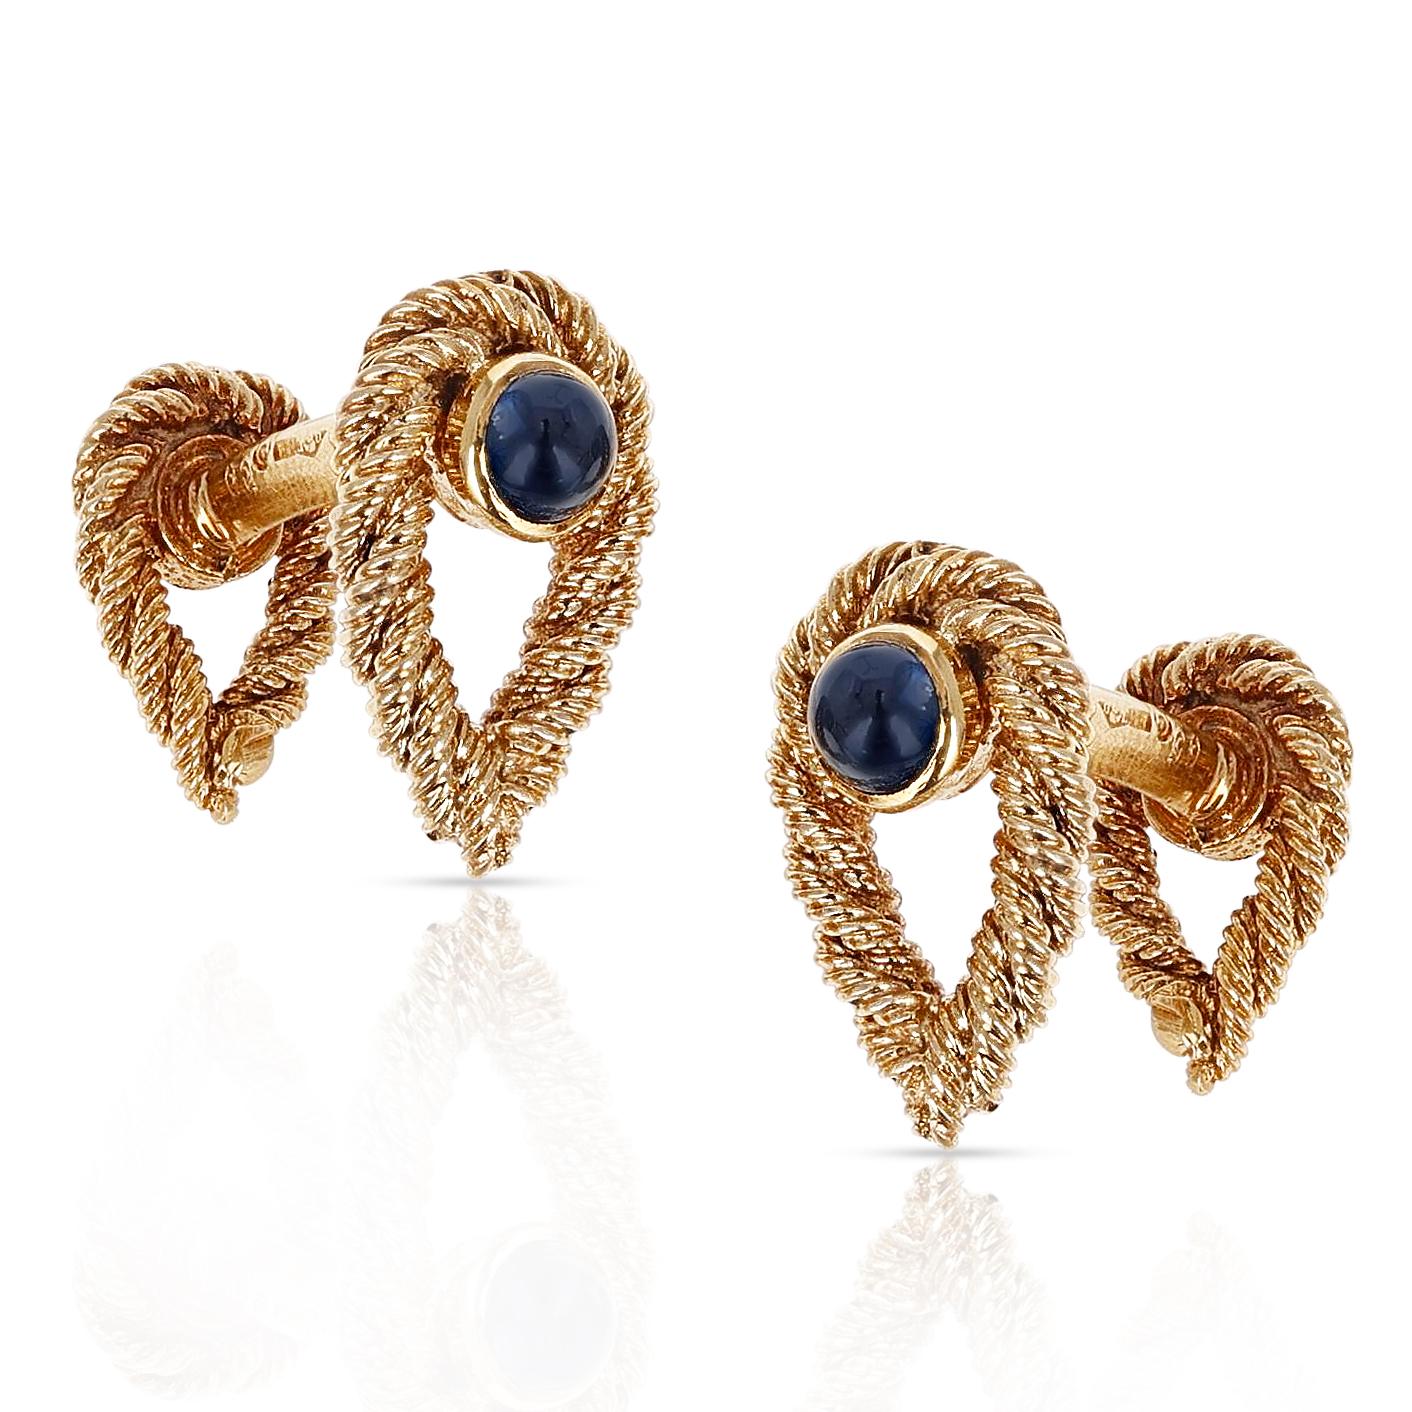 A pair of Van Cleef & Arpels Textured Blue Sapphire Cufflinks made in 18 Karat Yellow Gold. The total weight of the cufflinks is 13.70 grams. 
 

